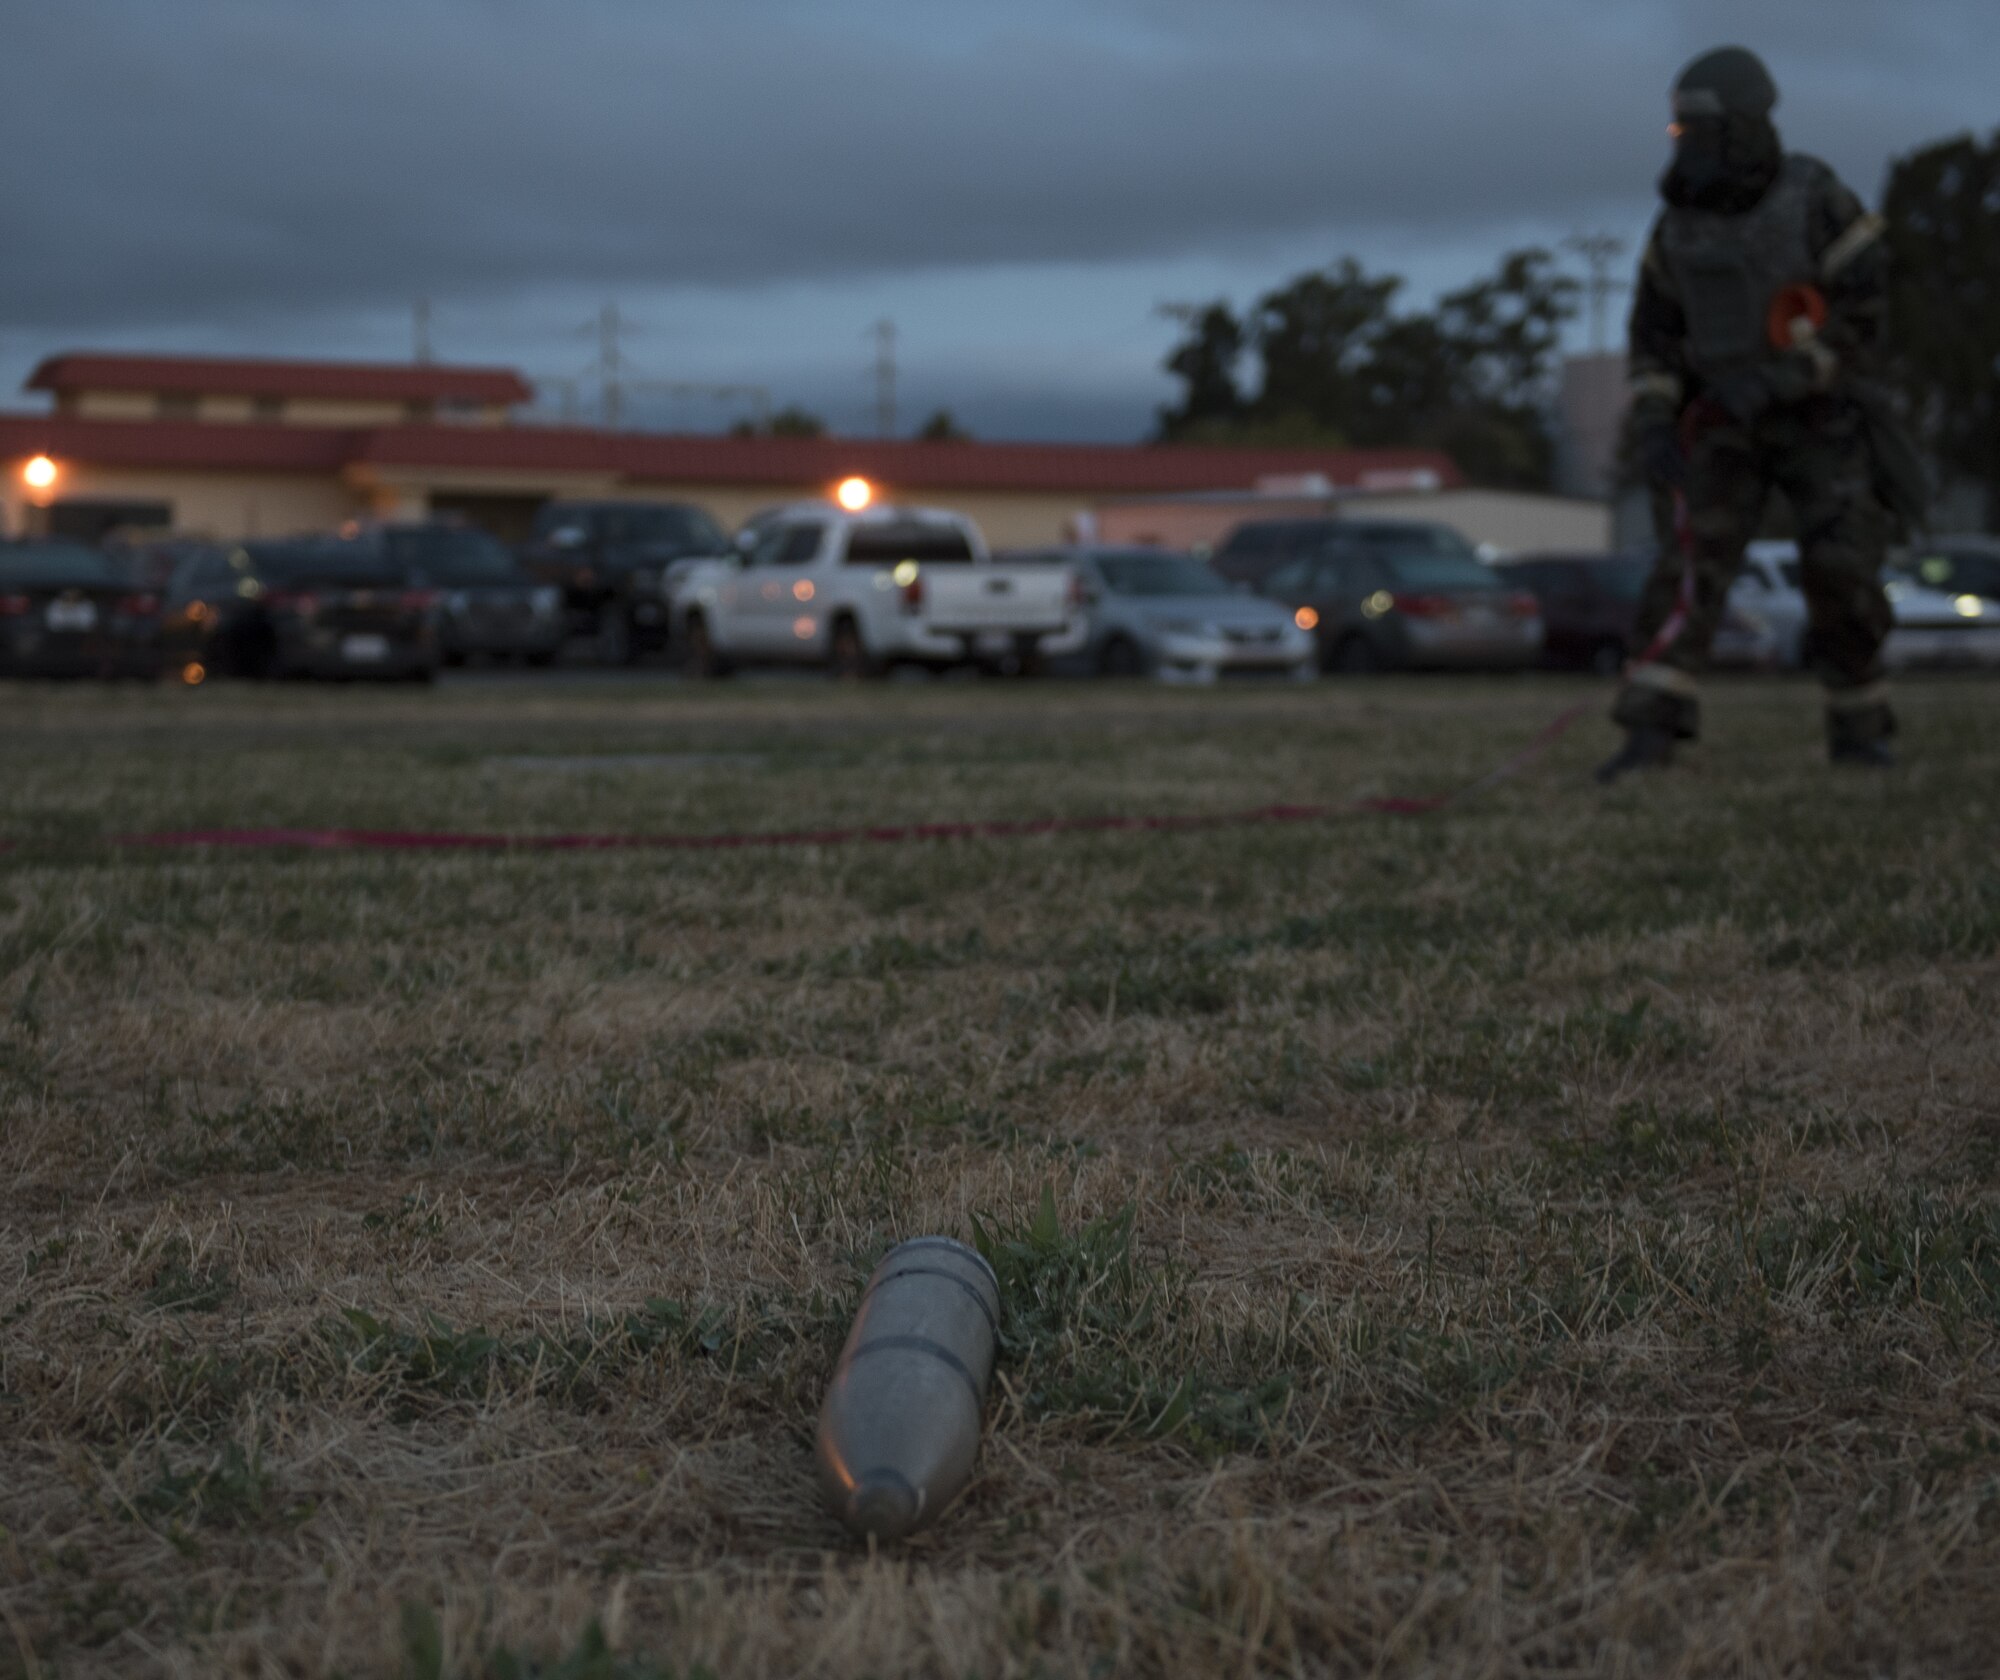 U.S. Air Force Airman 1st Class Kelvin Powell, 60th Medical Group bioenvironmental specialist, sets up a cordon around a fake projectile, May 7, 2019, during a readiness exercise at Travis Air Force Base, California. The base conducted a week-long exercise to evaluate Travis’ ability to execute and sustain rapid global mobility operations. (U.S. Air Force photo by Staff Sgt. Amber Carter)